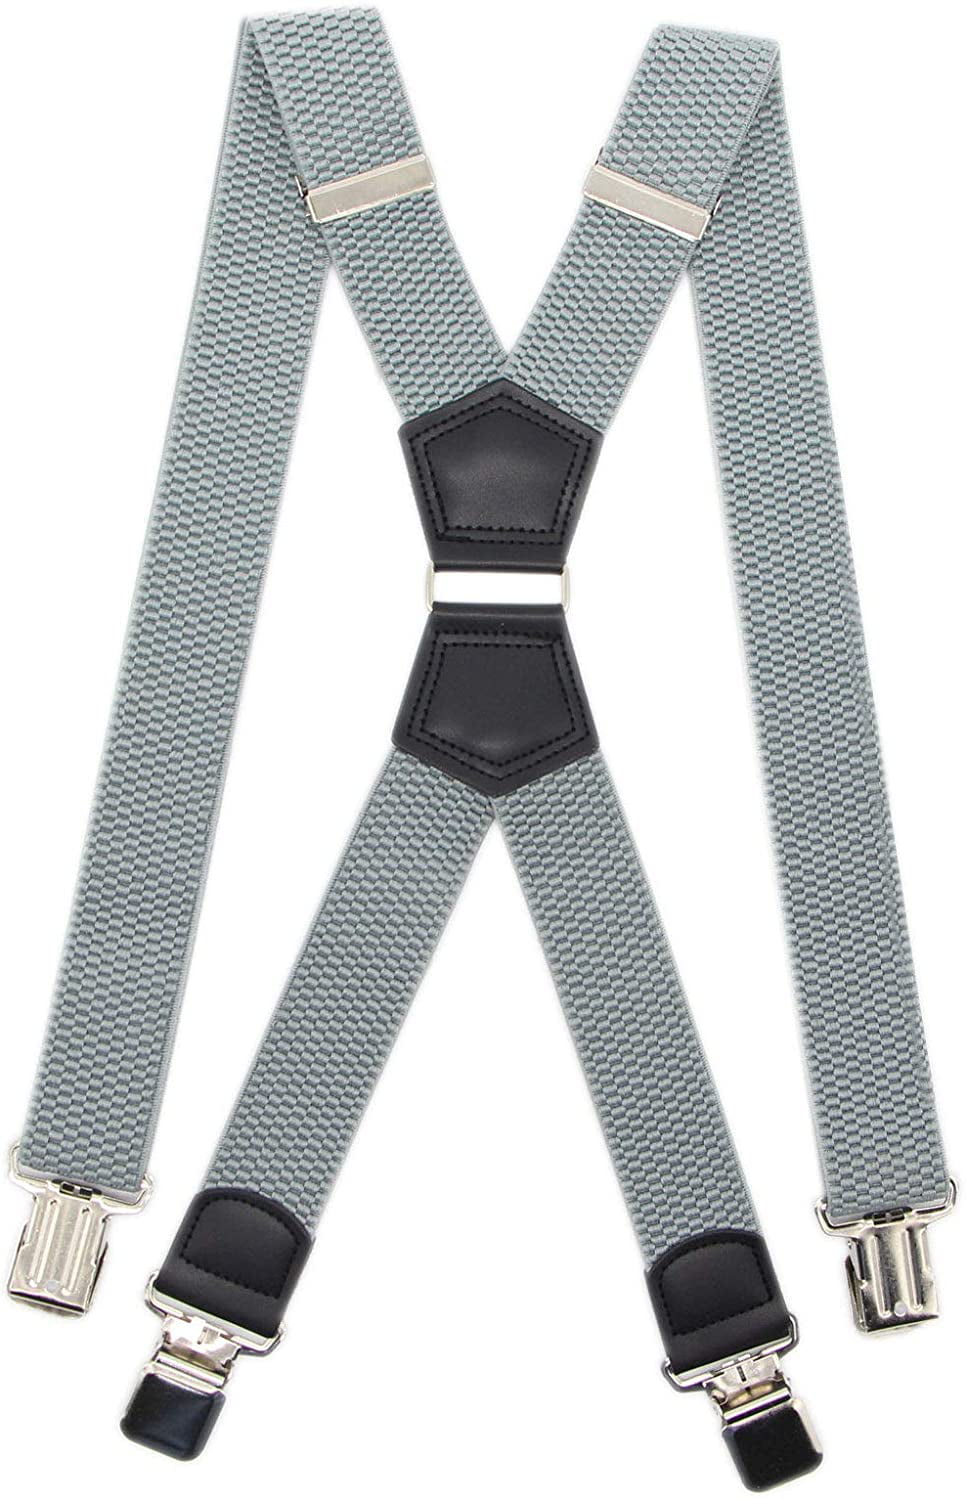 Mens Big Tall Super Strong Clips Wide Suspender X Back Heavy Duty Braces,Pefect For Work&Casual 